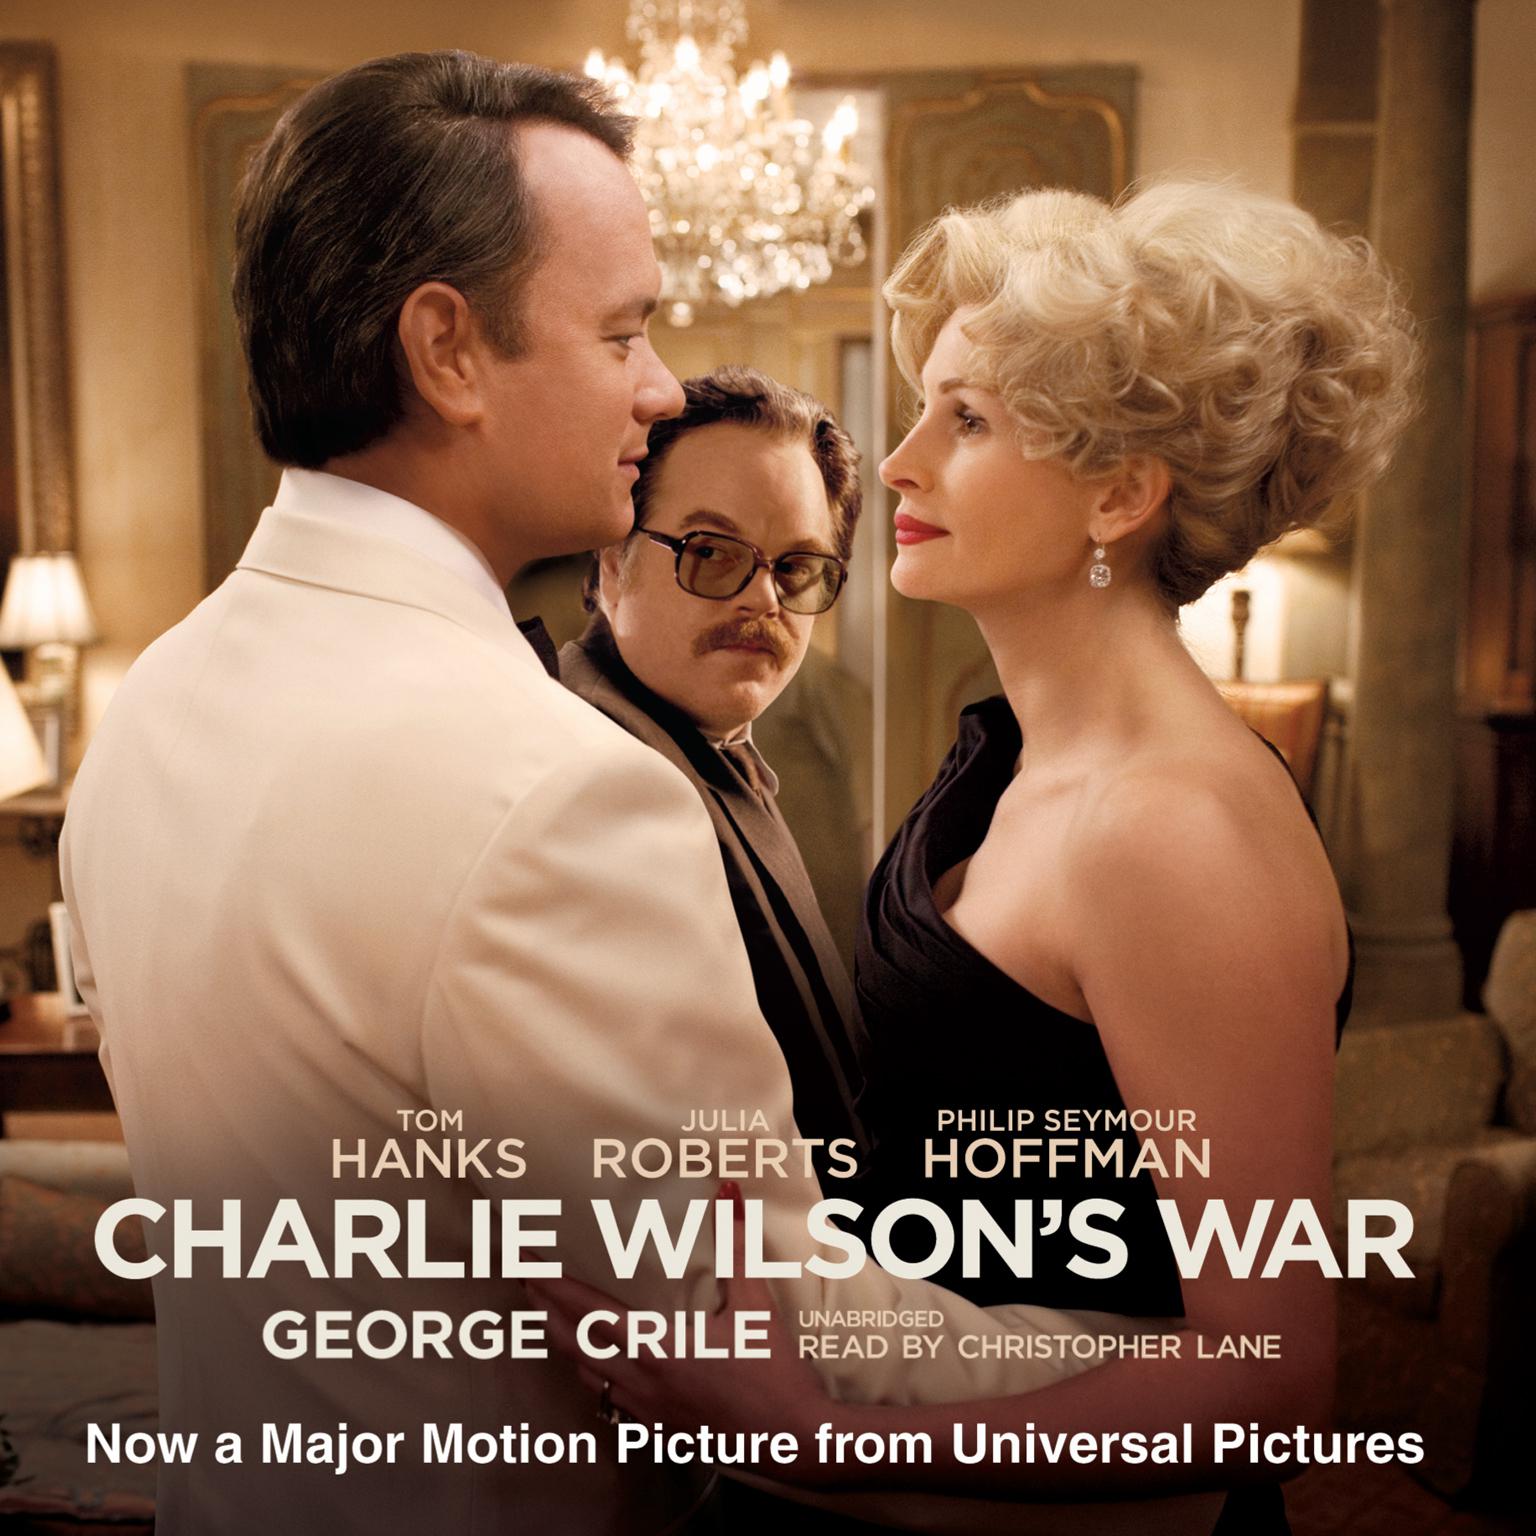 Charlie Wilson’s War: The Extraordinary Story of How the Wildest Man in Congress and a Rogue CIA Agent Changed the History of Our Times Audiobook, by George Crile